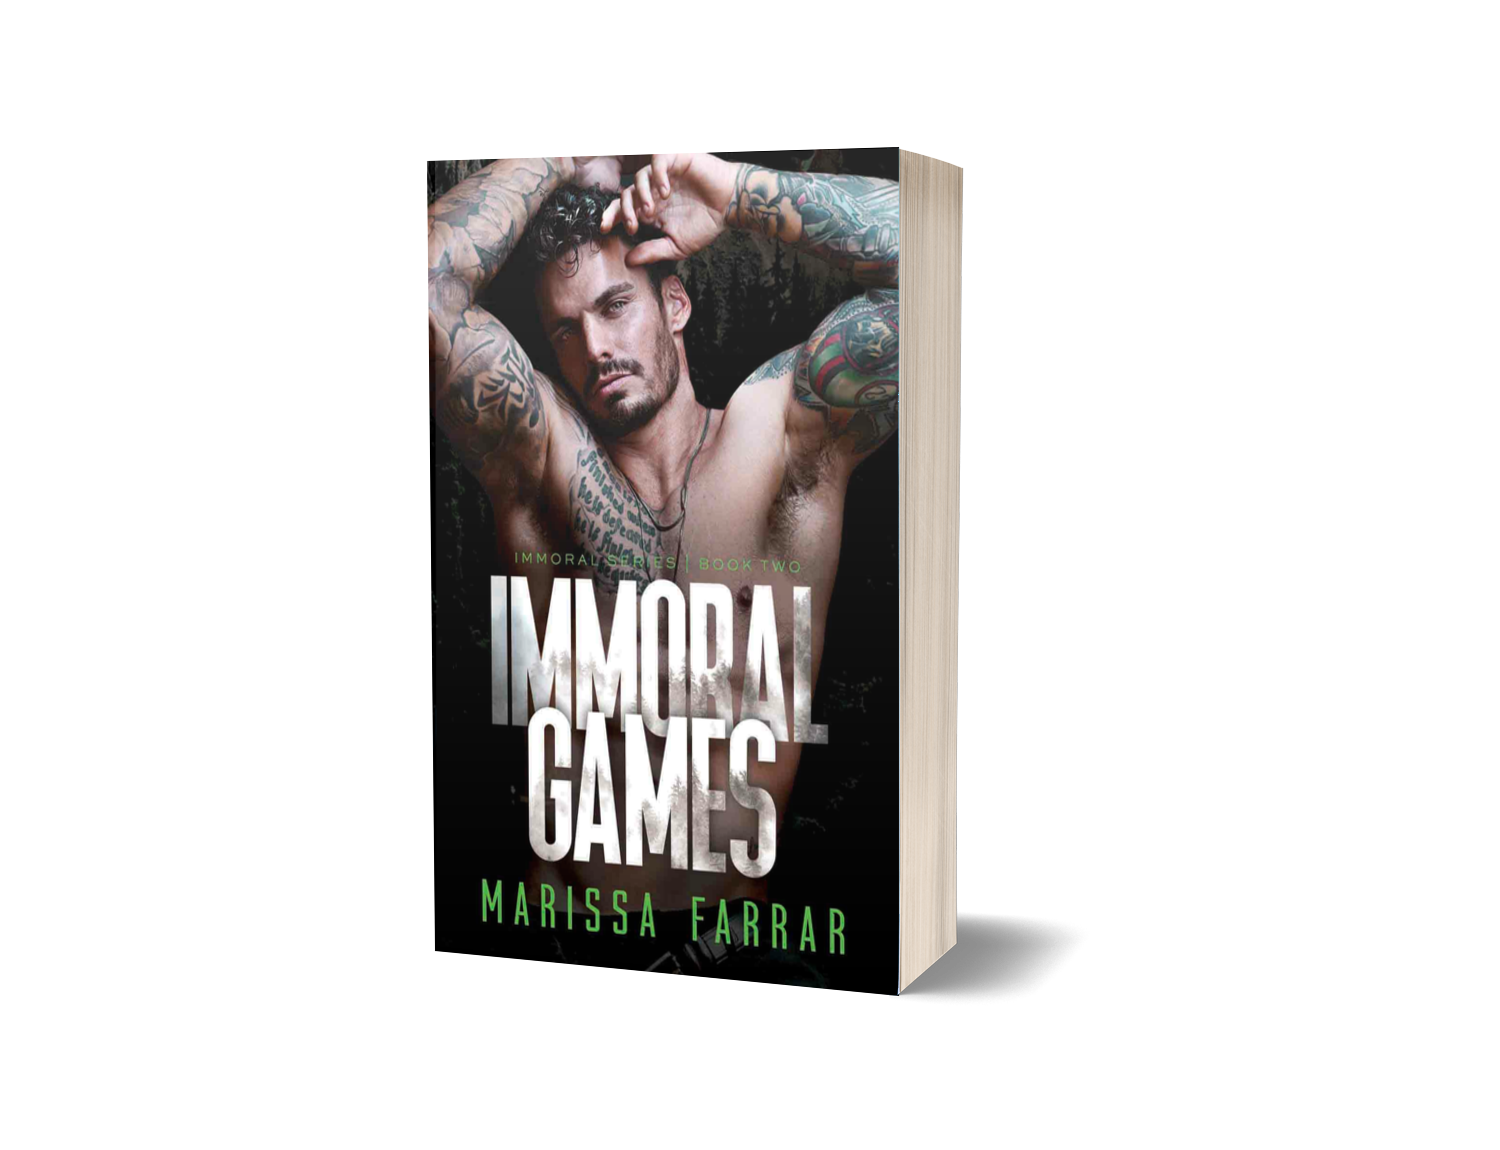 Immoral Games Paperback, soft cover, print book, signed, Why Choose Forbidden romance Immoral Series by Marissa Farrar 